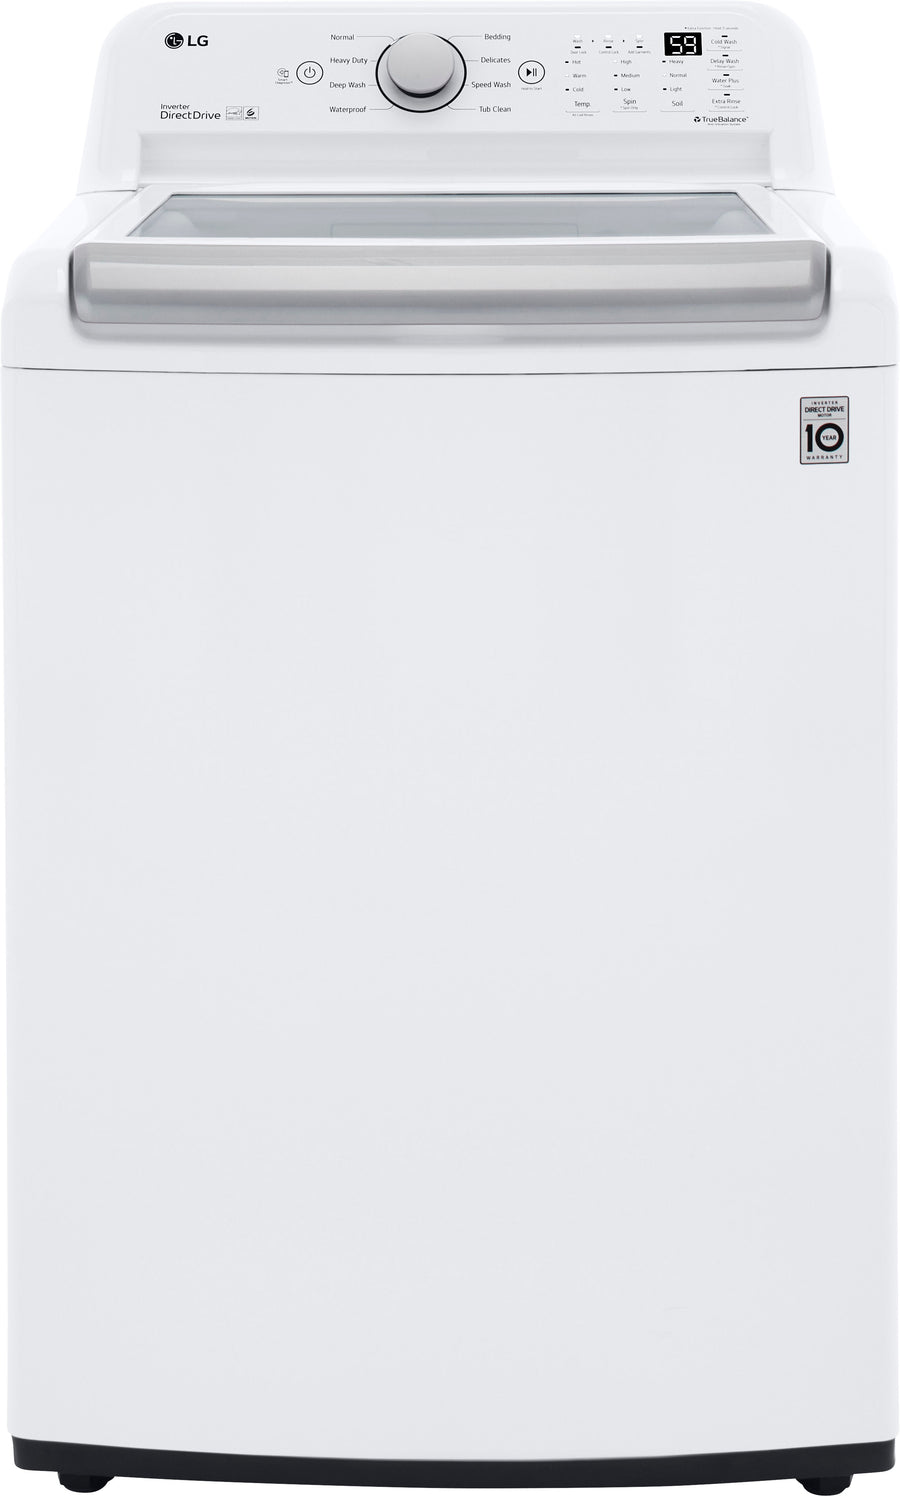 LG - 5.0 Cu. Ft. Smart Top Load Washer with 6Motion Technology - White_0